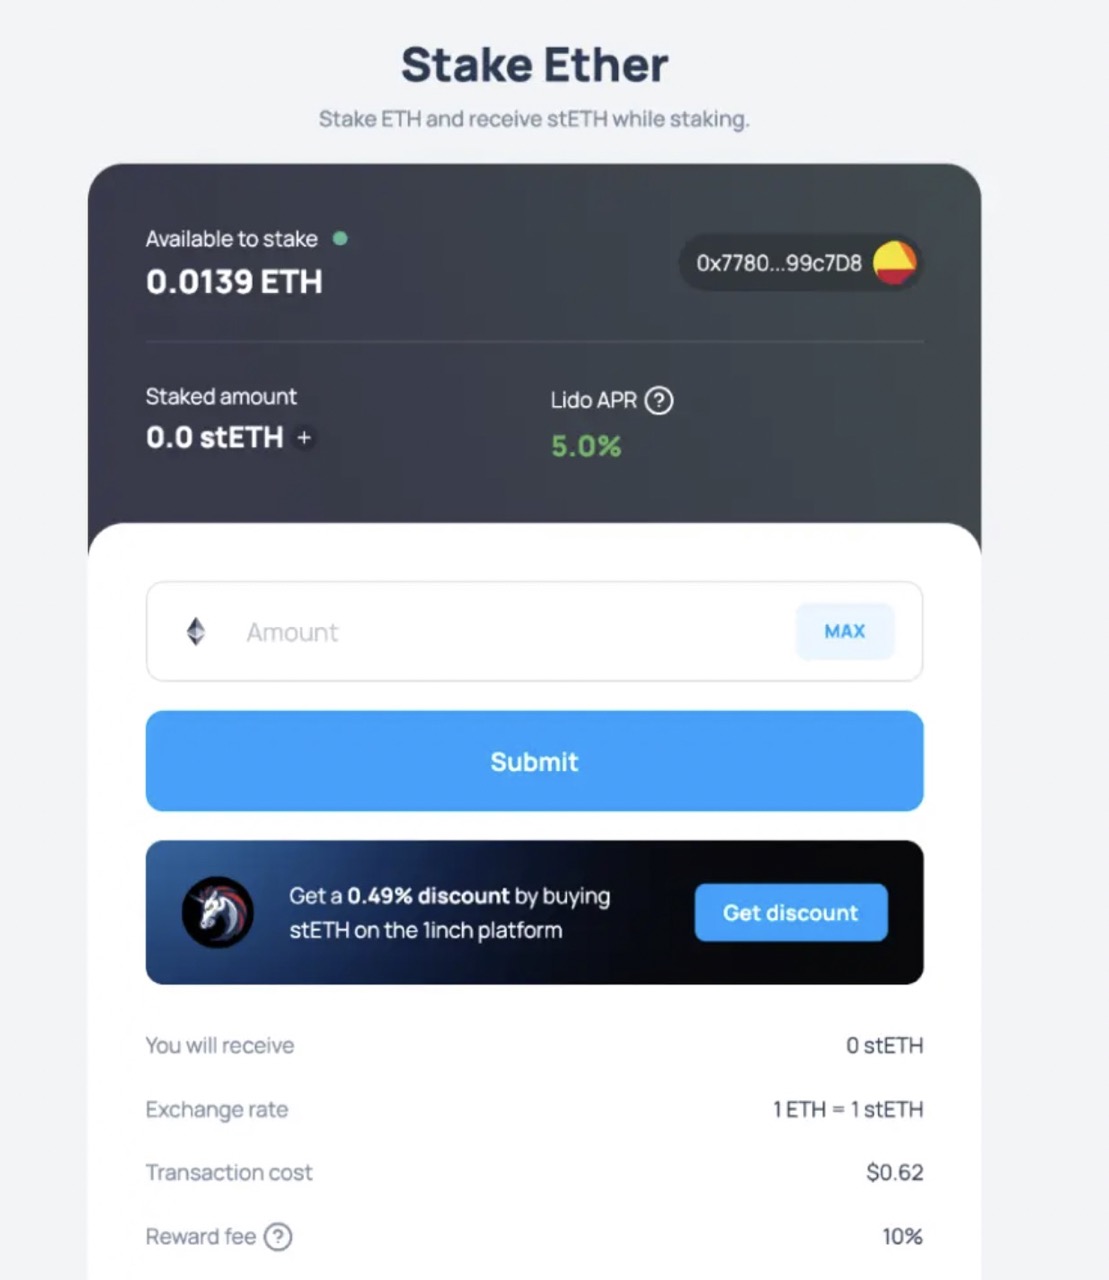 Features of Gemini's Staking Wallet